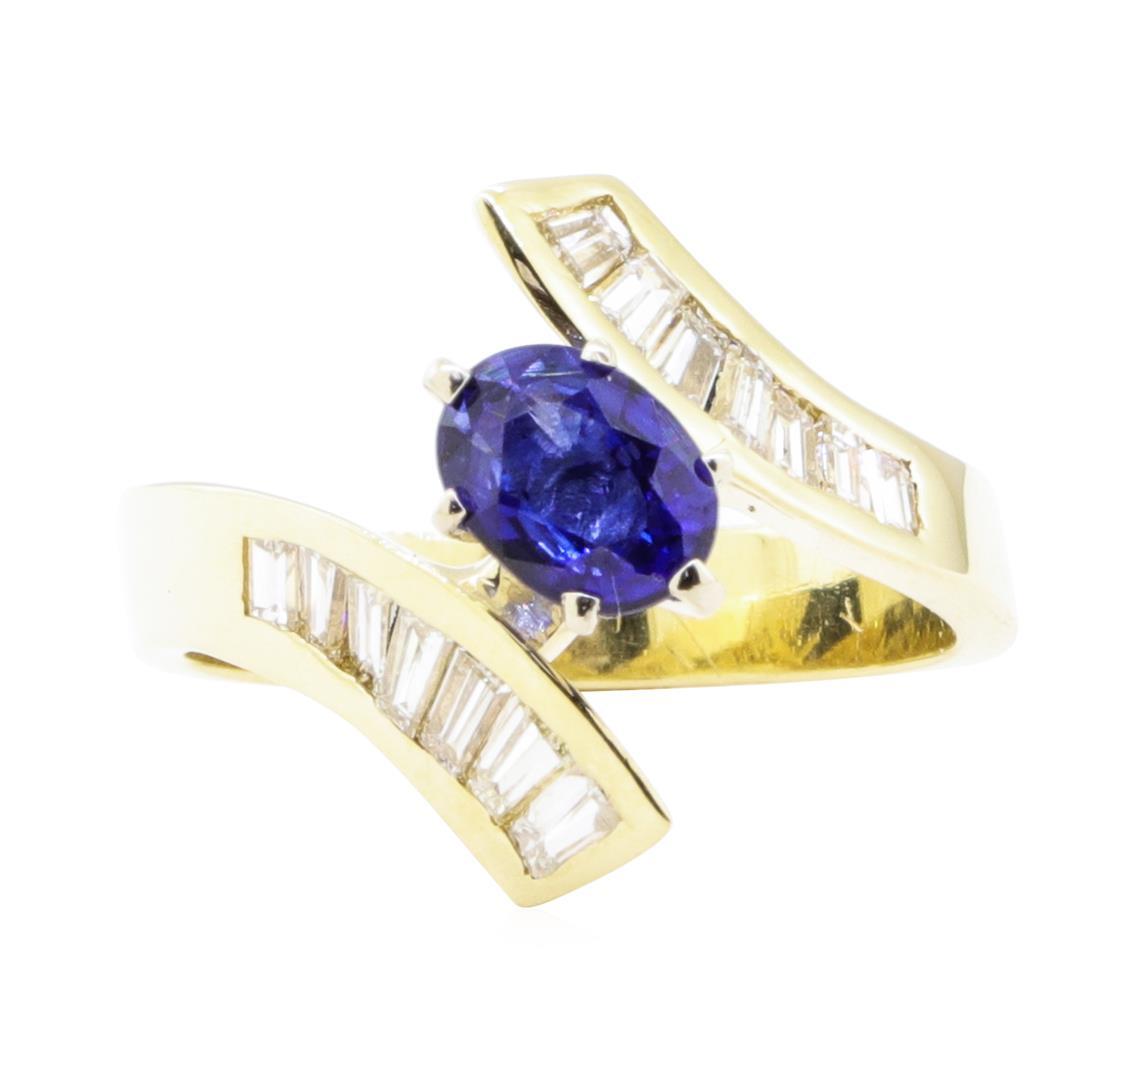 1.64 ctw Sapphire And Diamond Ring - 14KT Yellow Gold